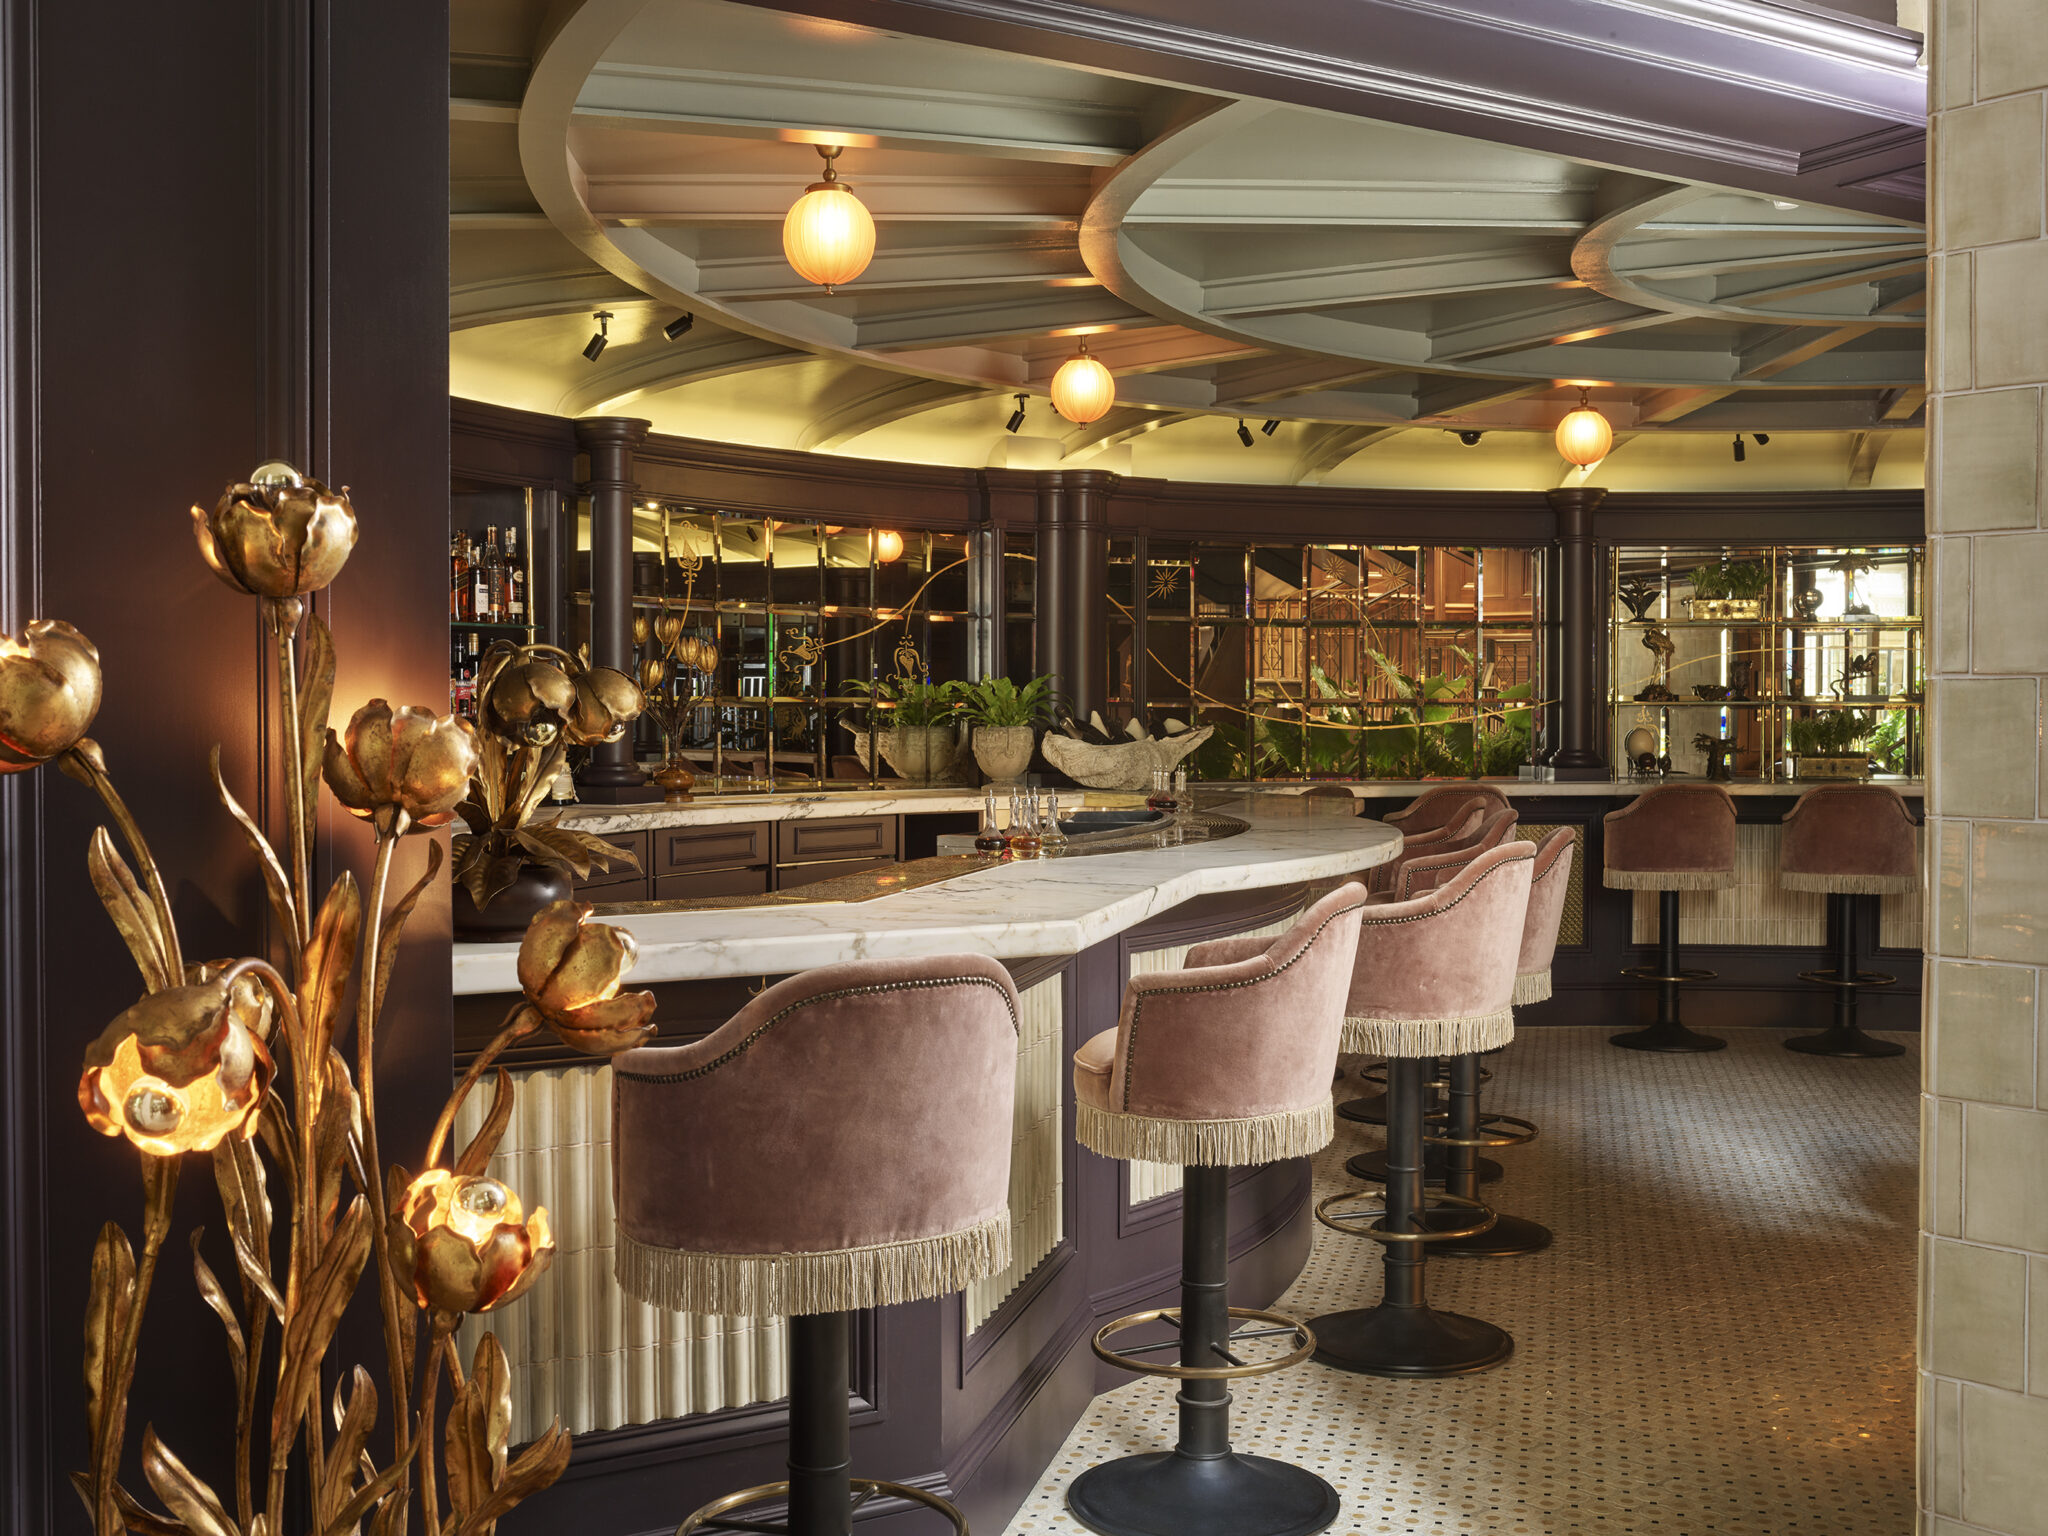 London's Nomad hotel is 'beautiful, bohemian and evocative'